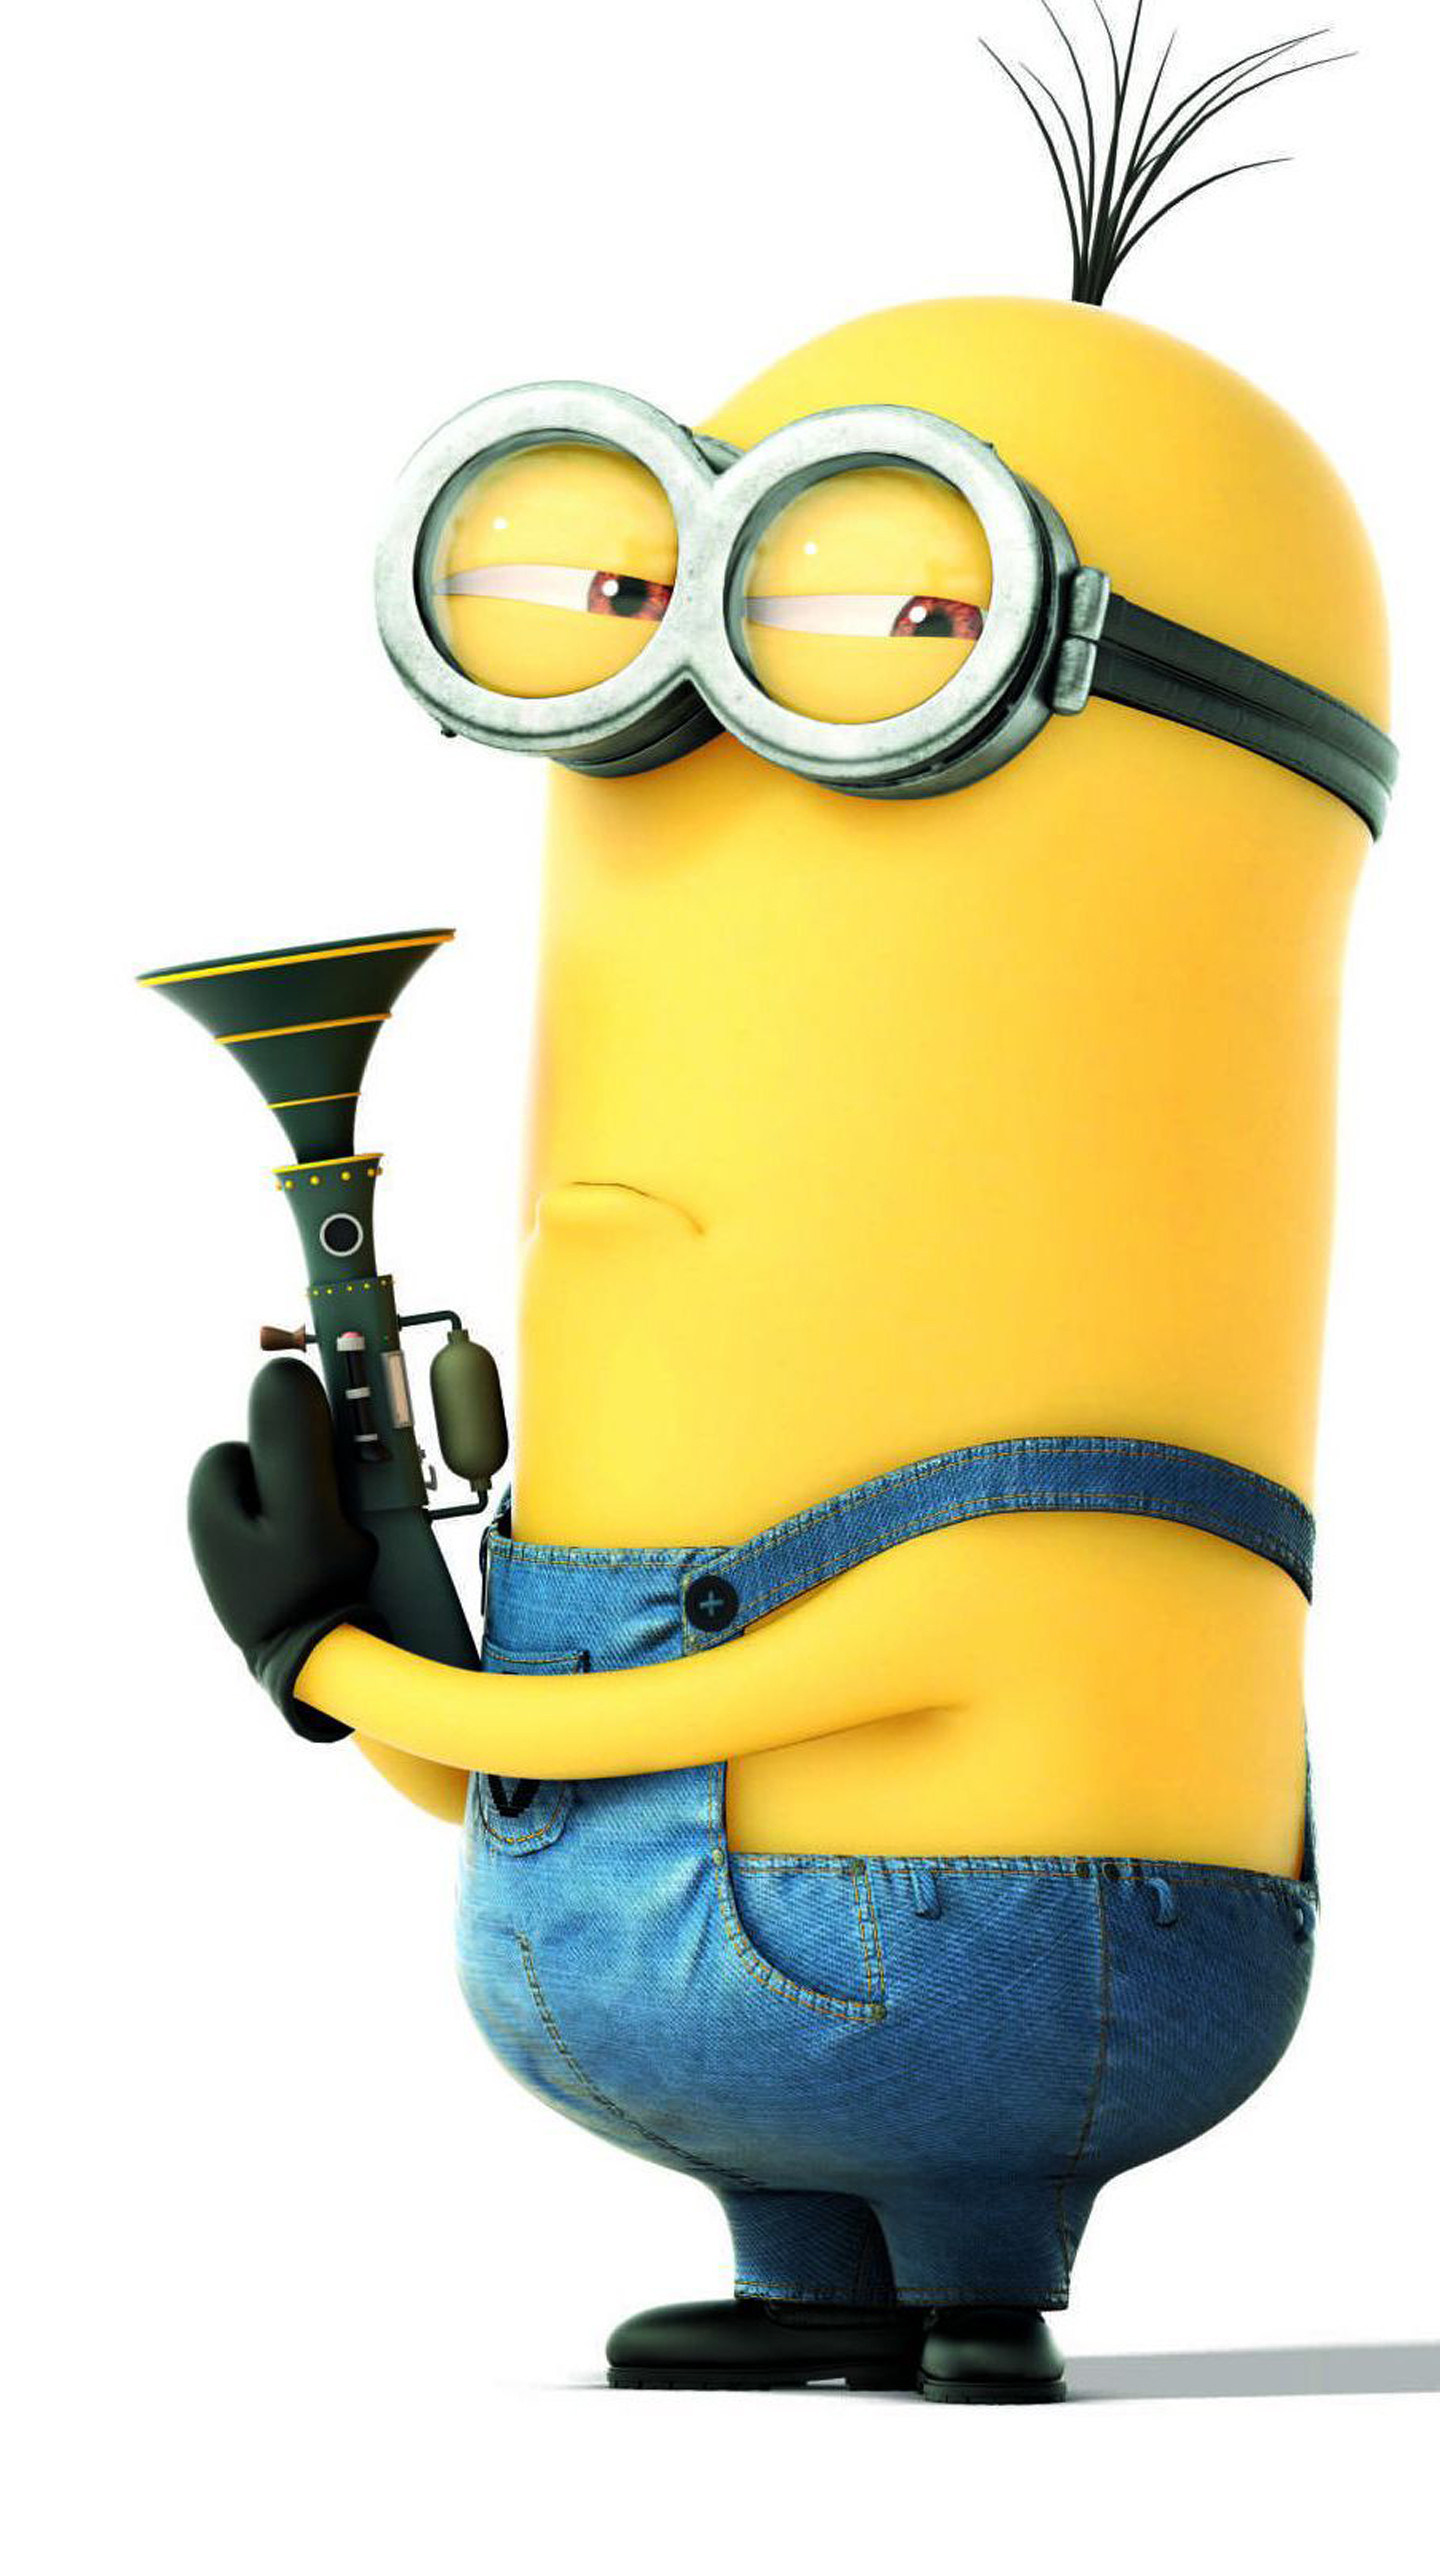 Free Minion Wallpaper Android For Samsung Galaxy S7 - Minion With Gun Png - HD Wallpaper 